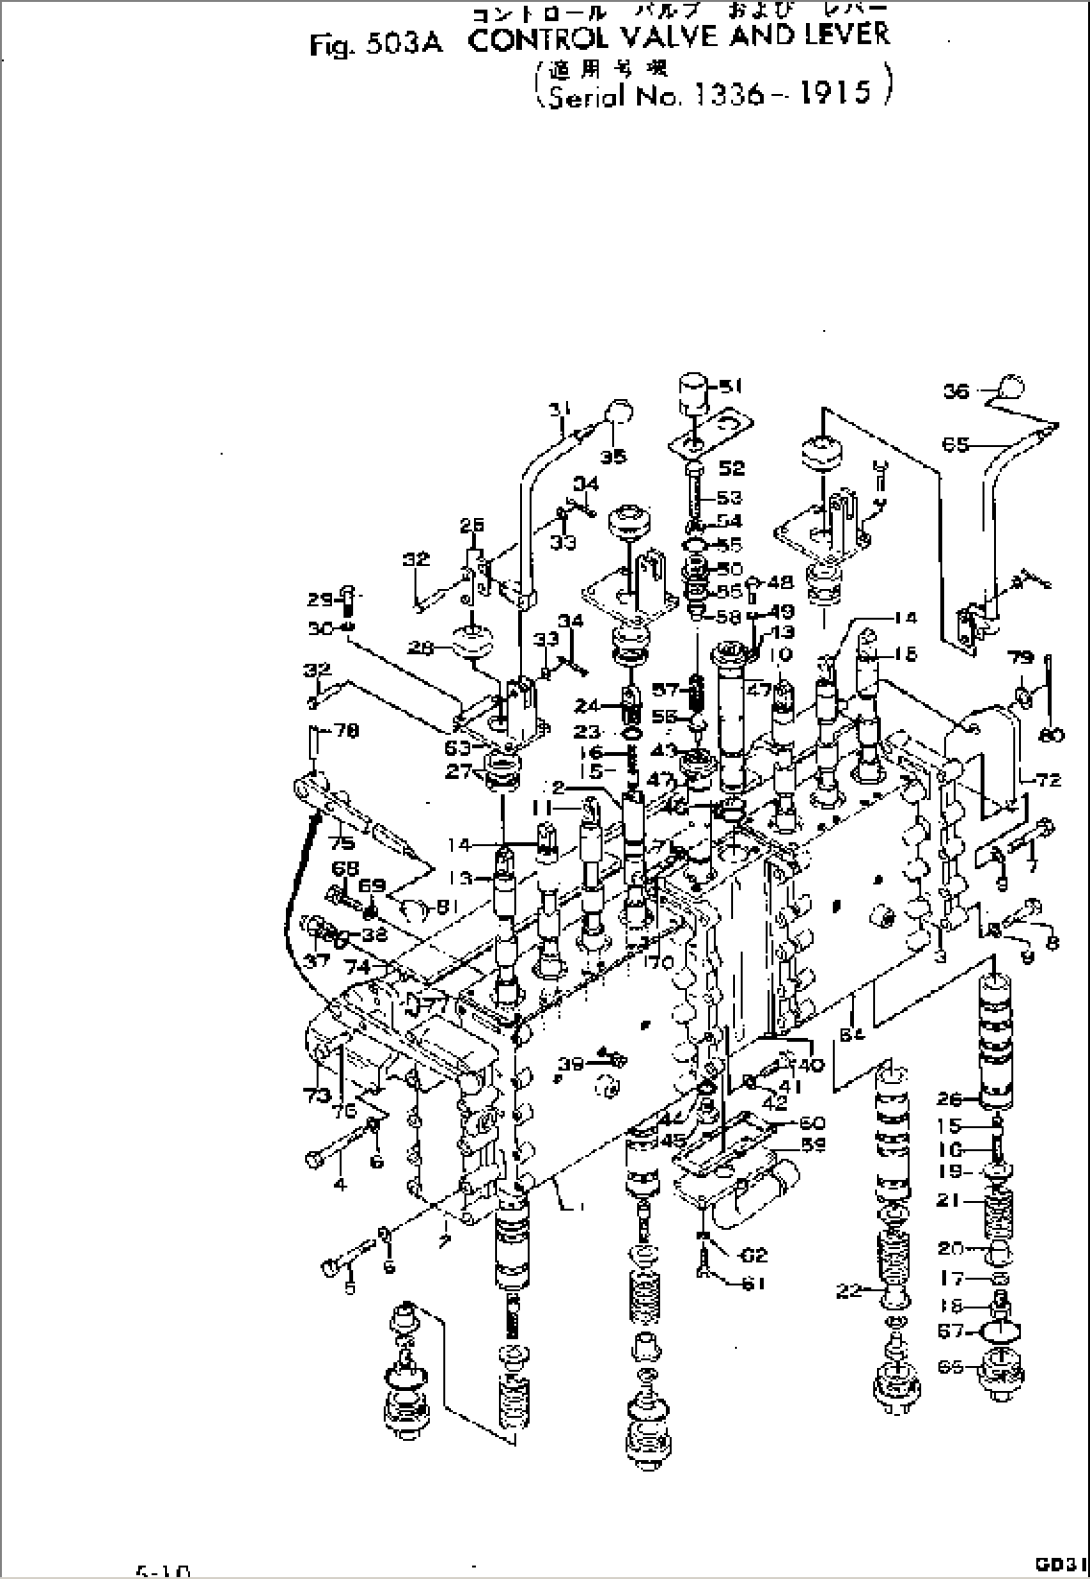 CONTROL VALVE AND LEVER